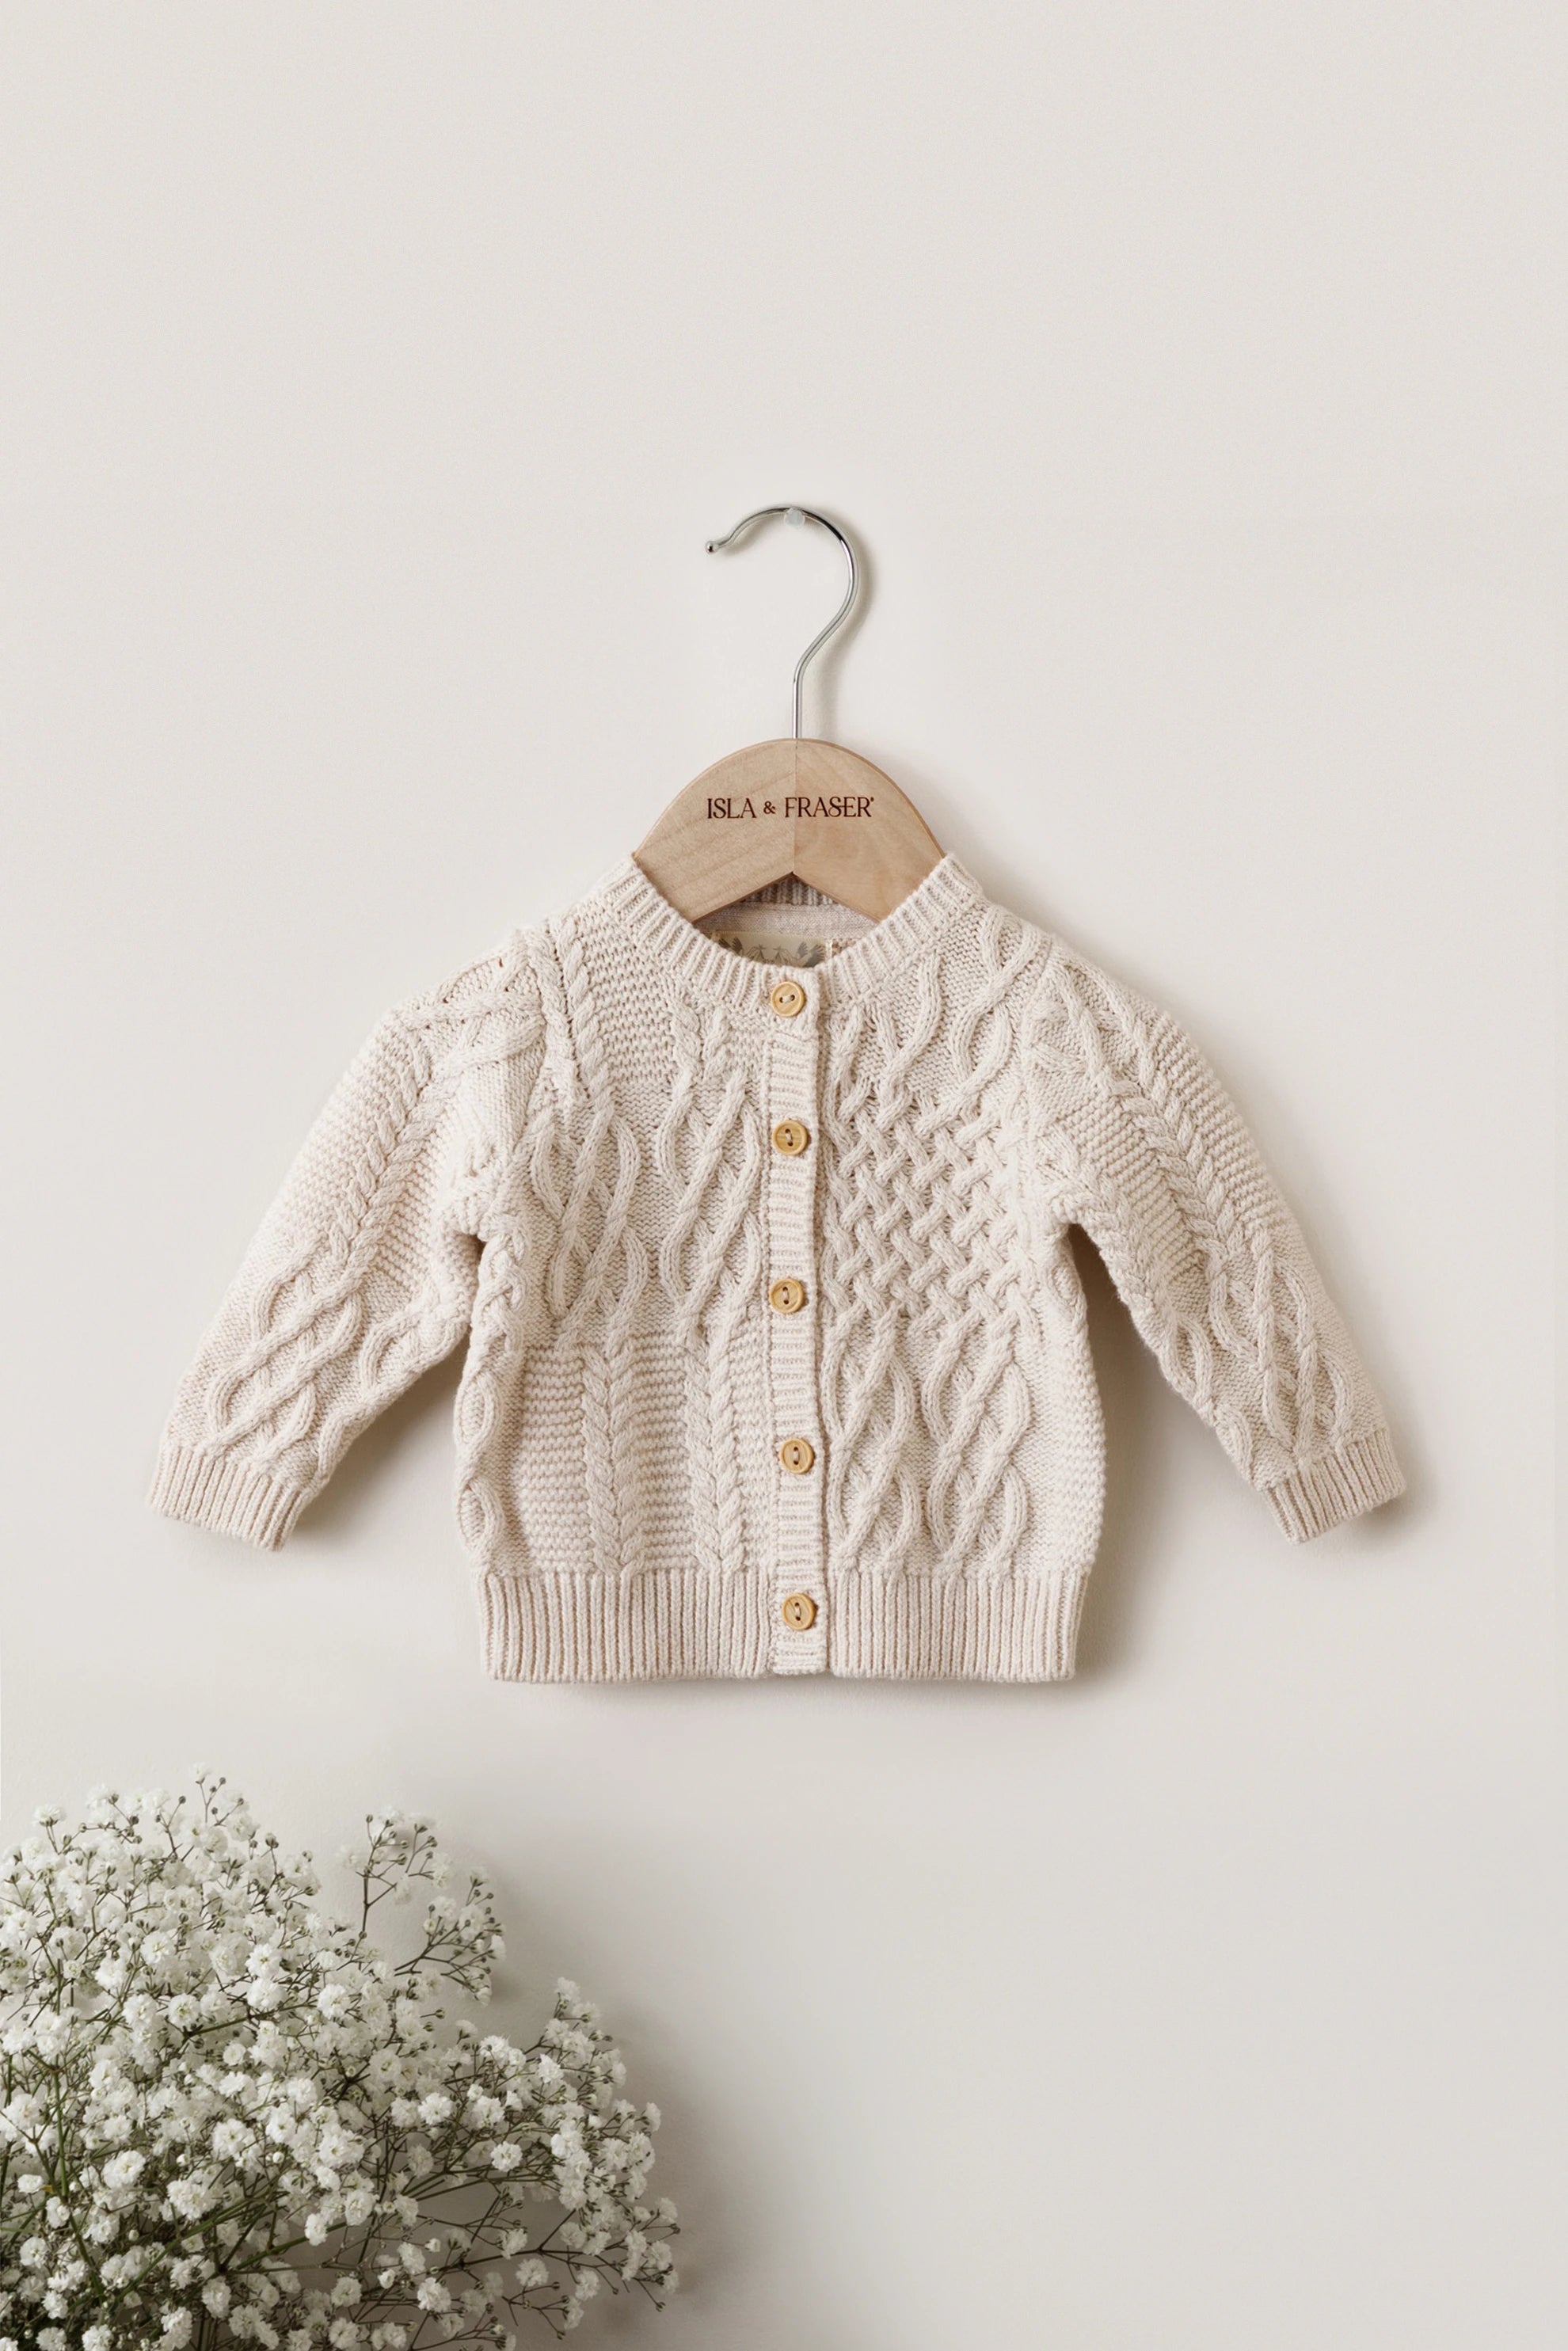 Isla & Fraser Organic Cotton Cable Knit Baby Cardigan - Oat